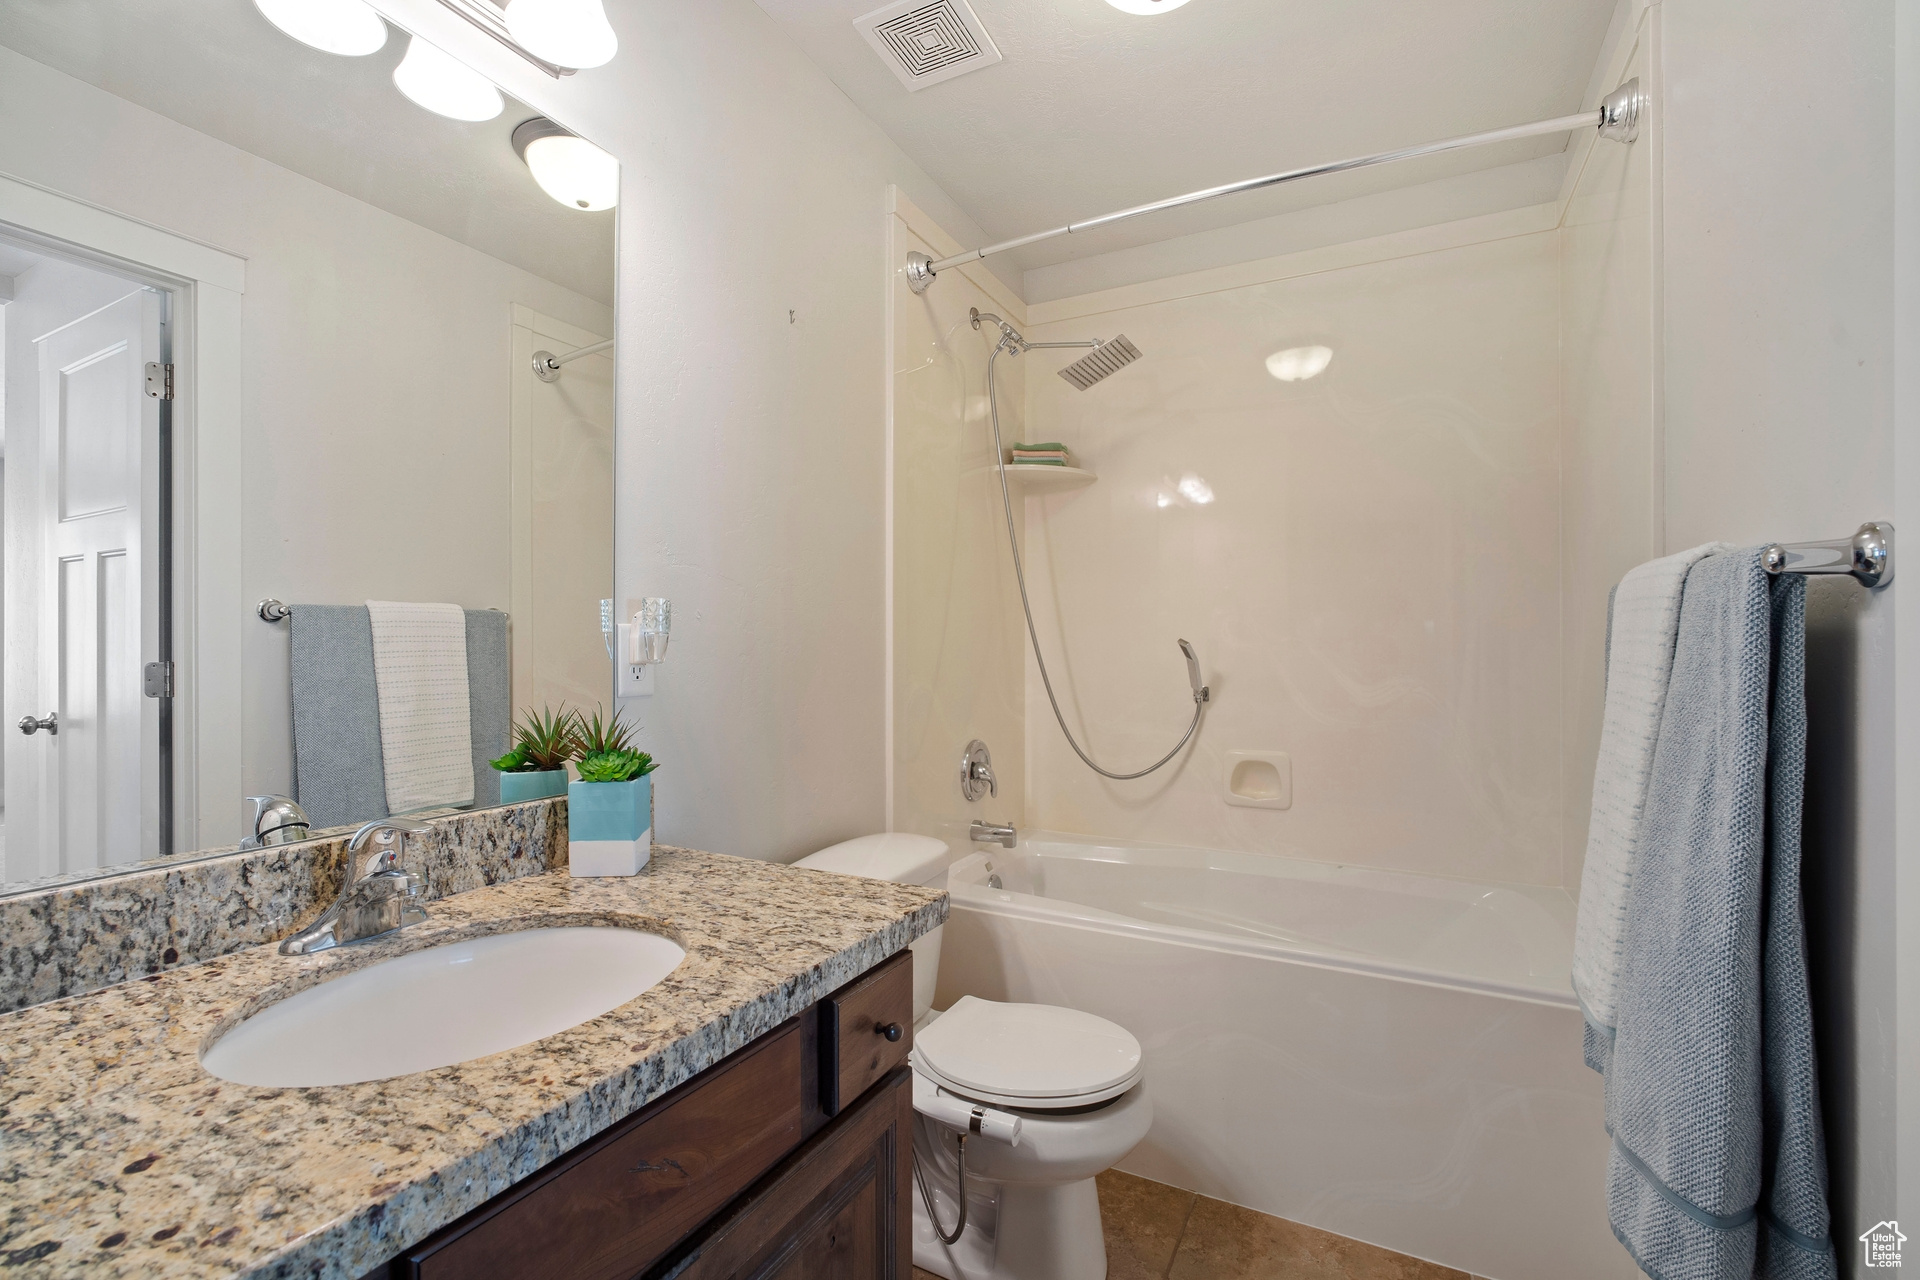 Full bathroom with tile floors, granite countertops, and upgraded shower fixture.